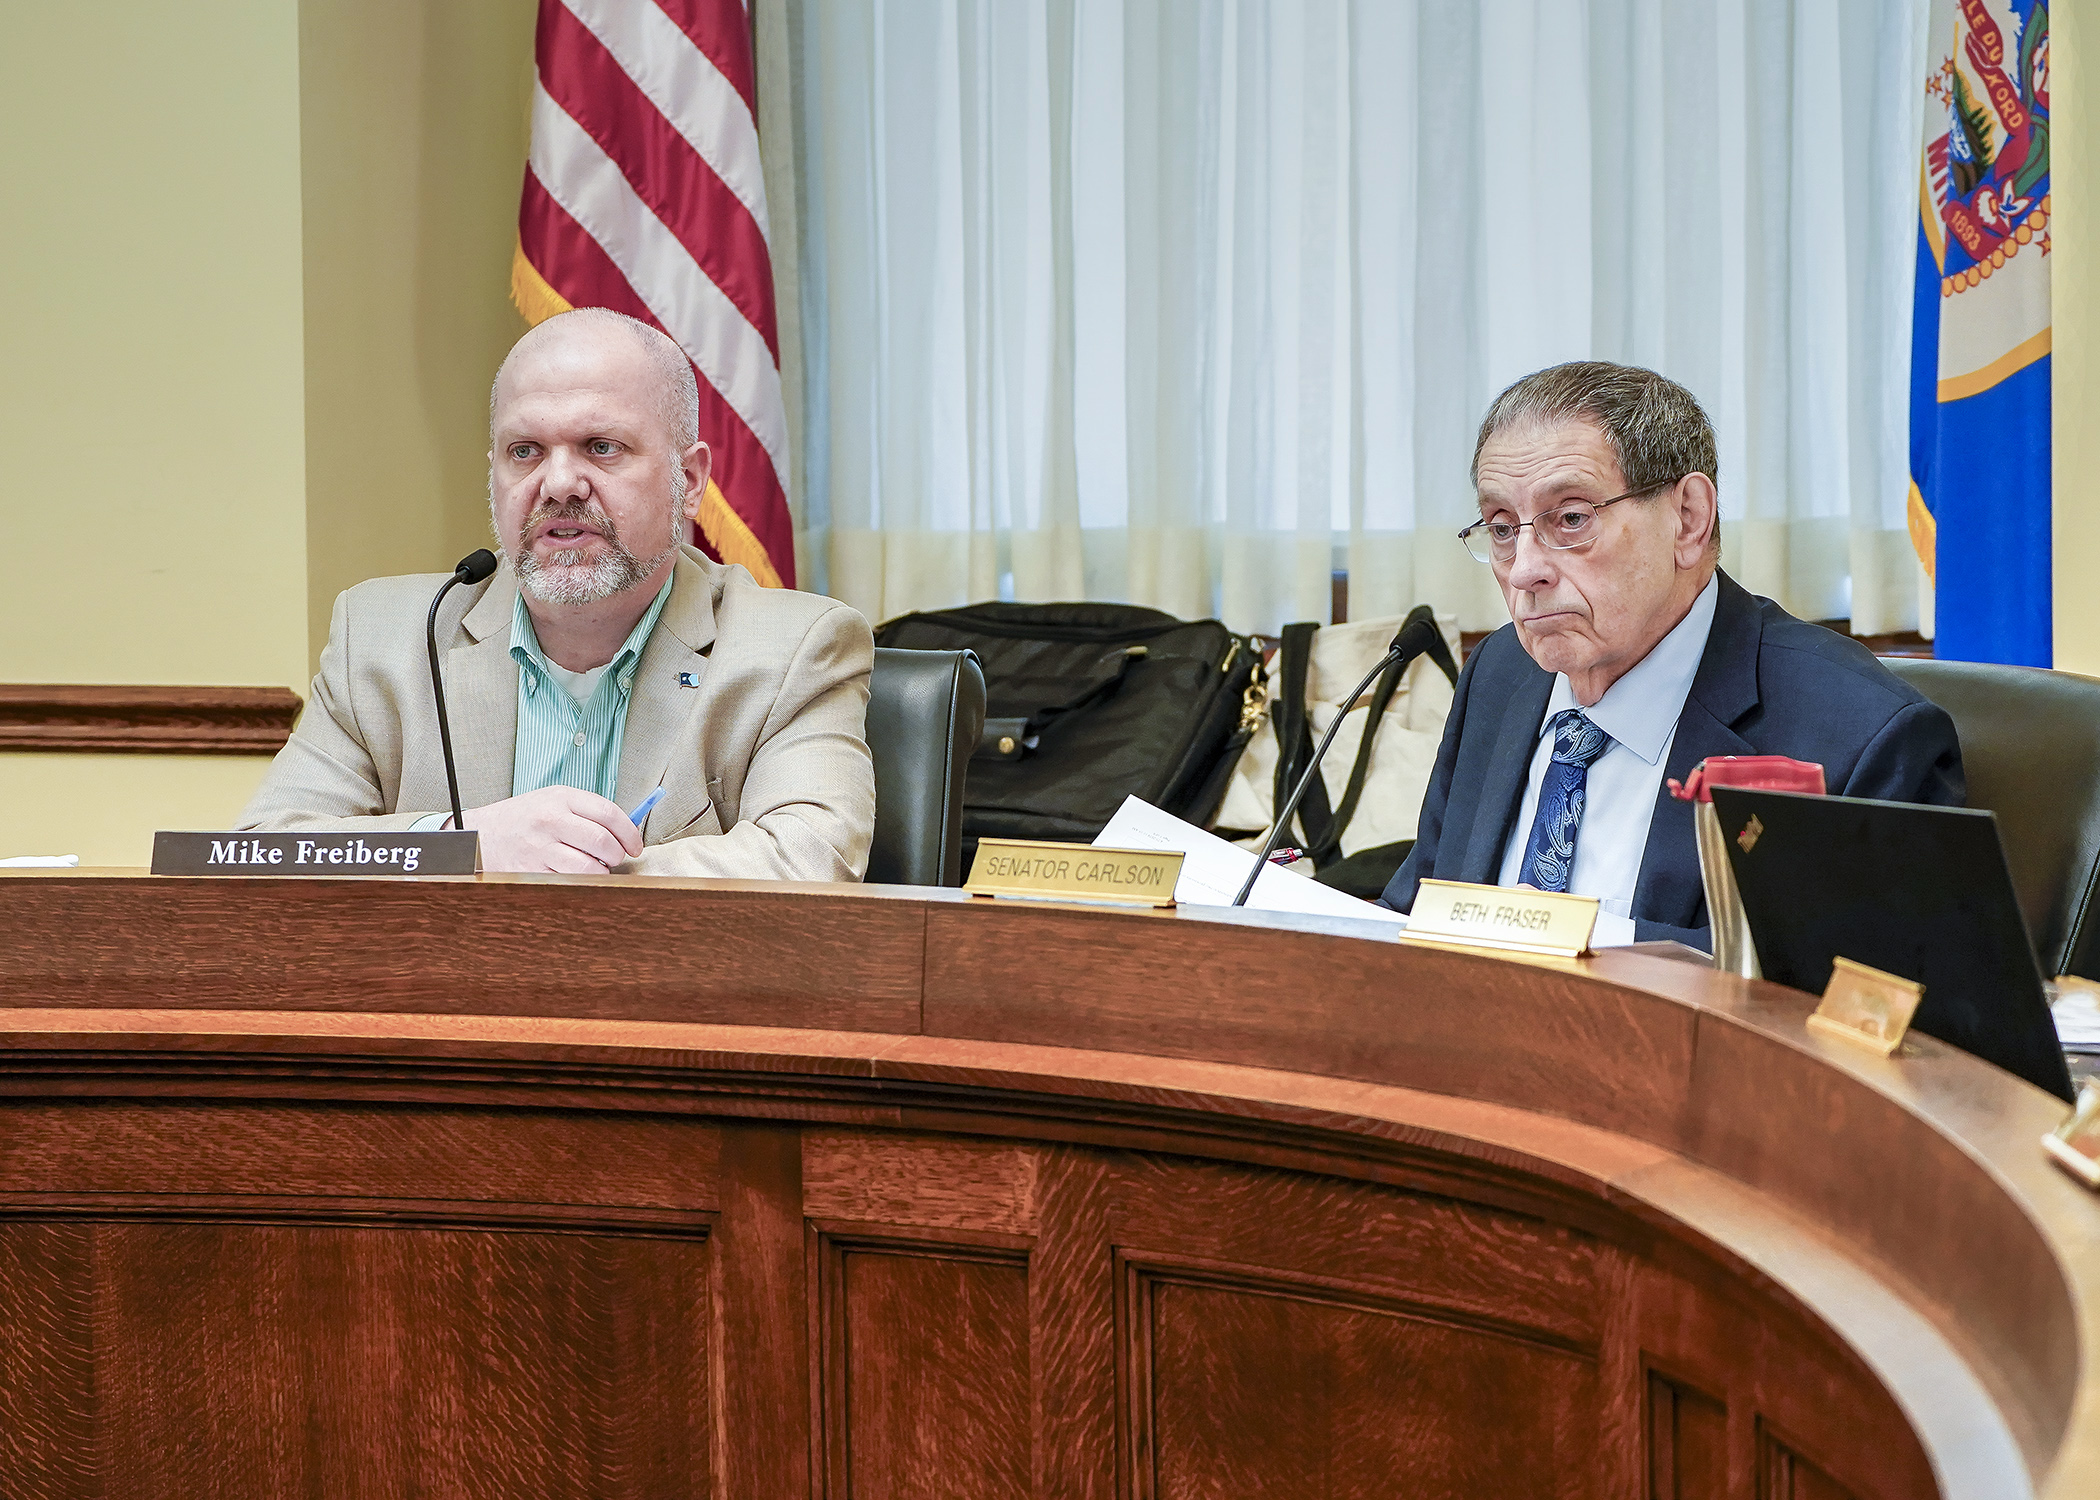 Rep. Mike Freiberg and Sen. Jim Carlson listen to a walk-through of differences between the House and Senate election policy bills during the first conference committee meeting. (Photo by Andrew VonBank)